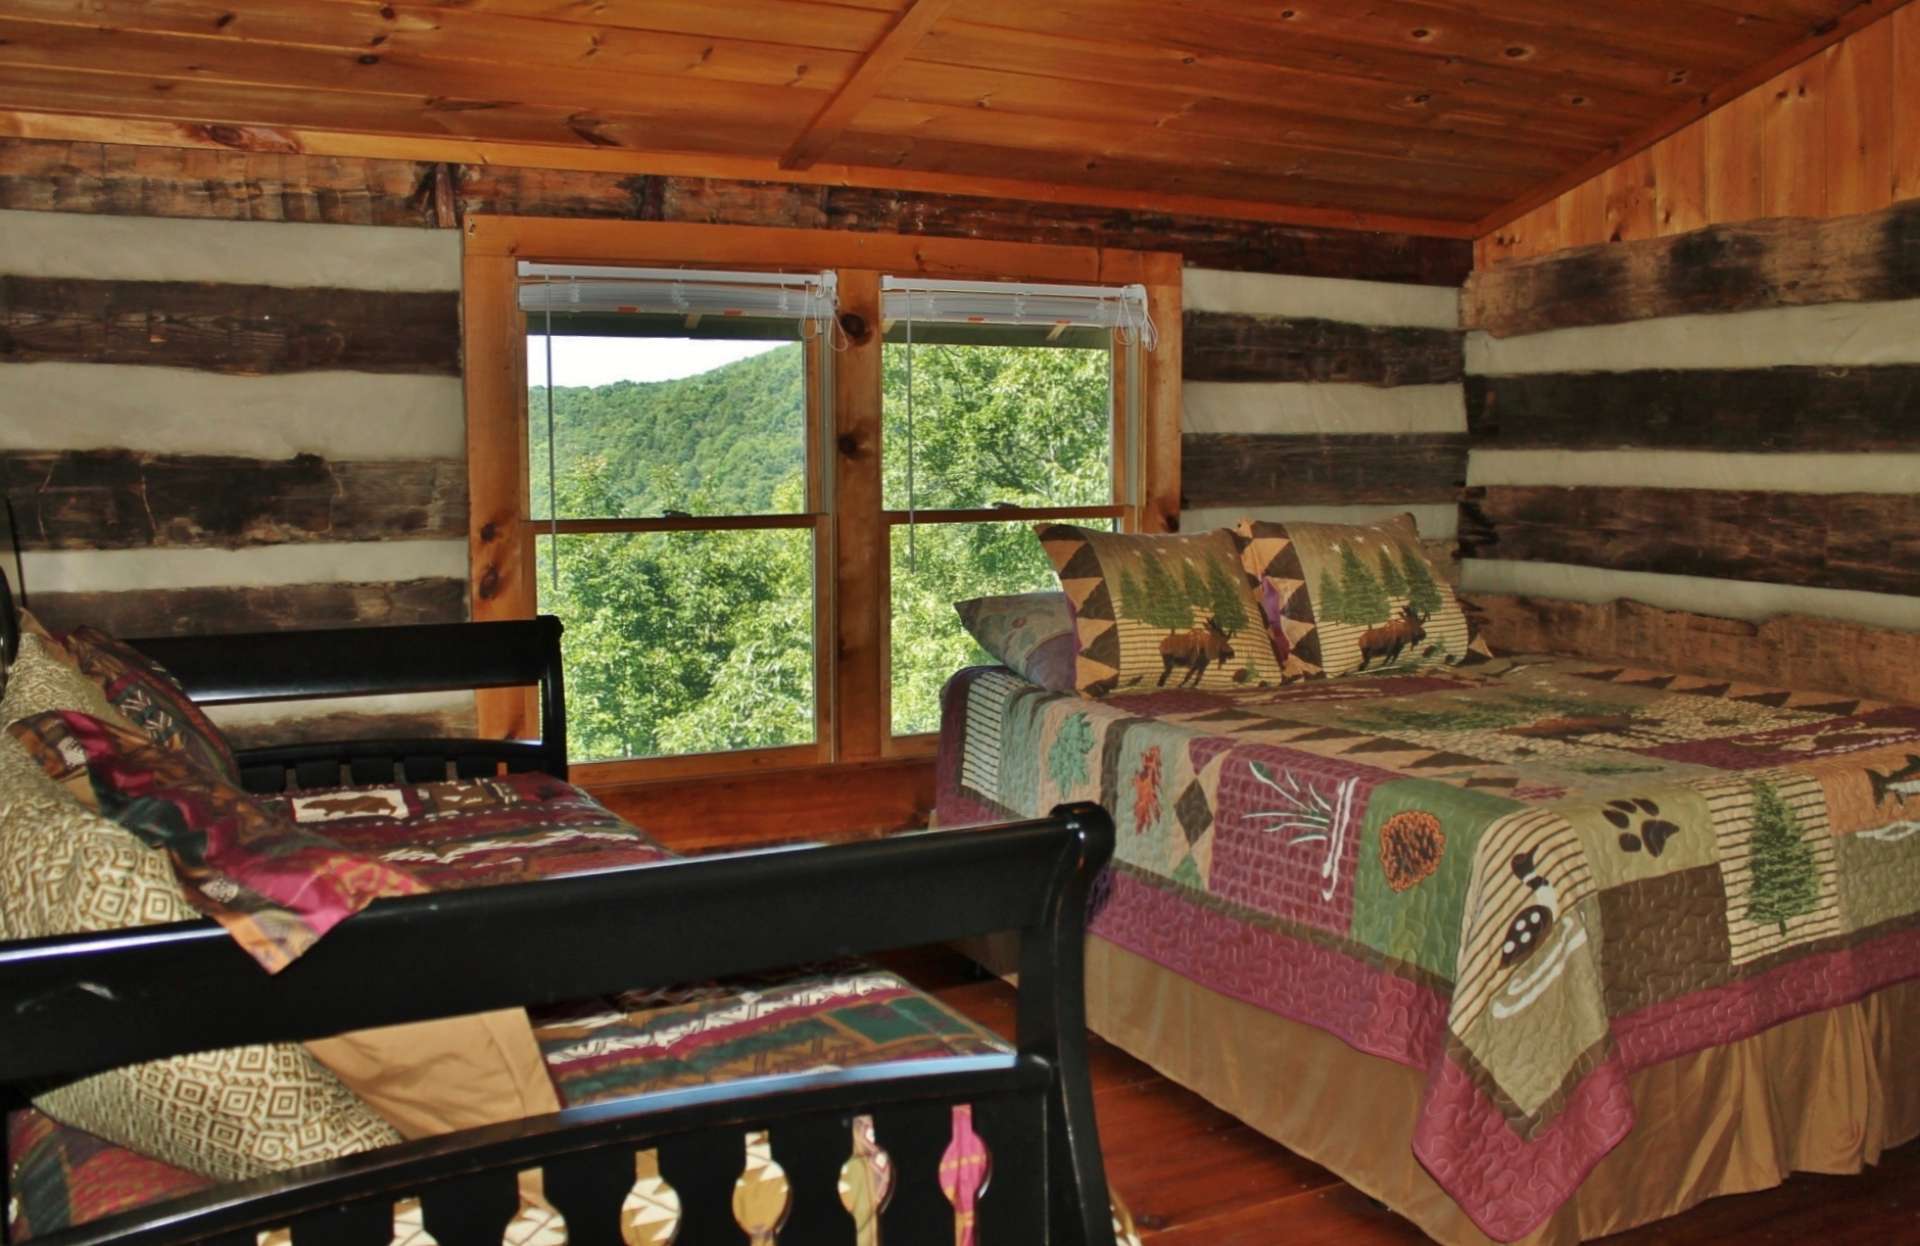 The upper level provides the loft sleeping area, where your guests can also enjoy the views, and a full bath.